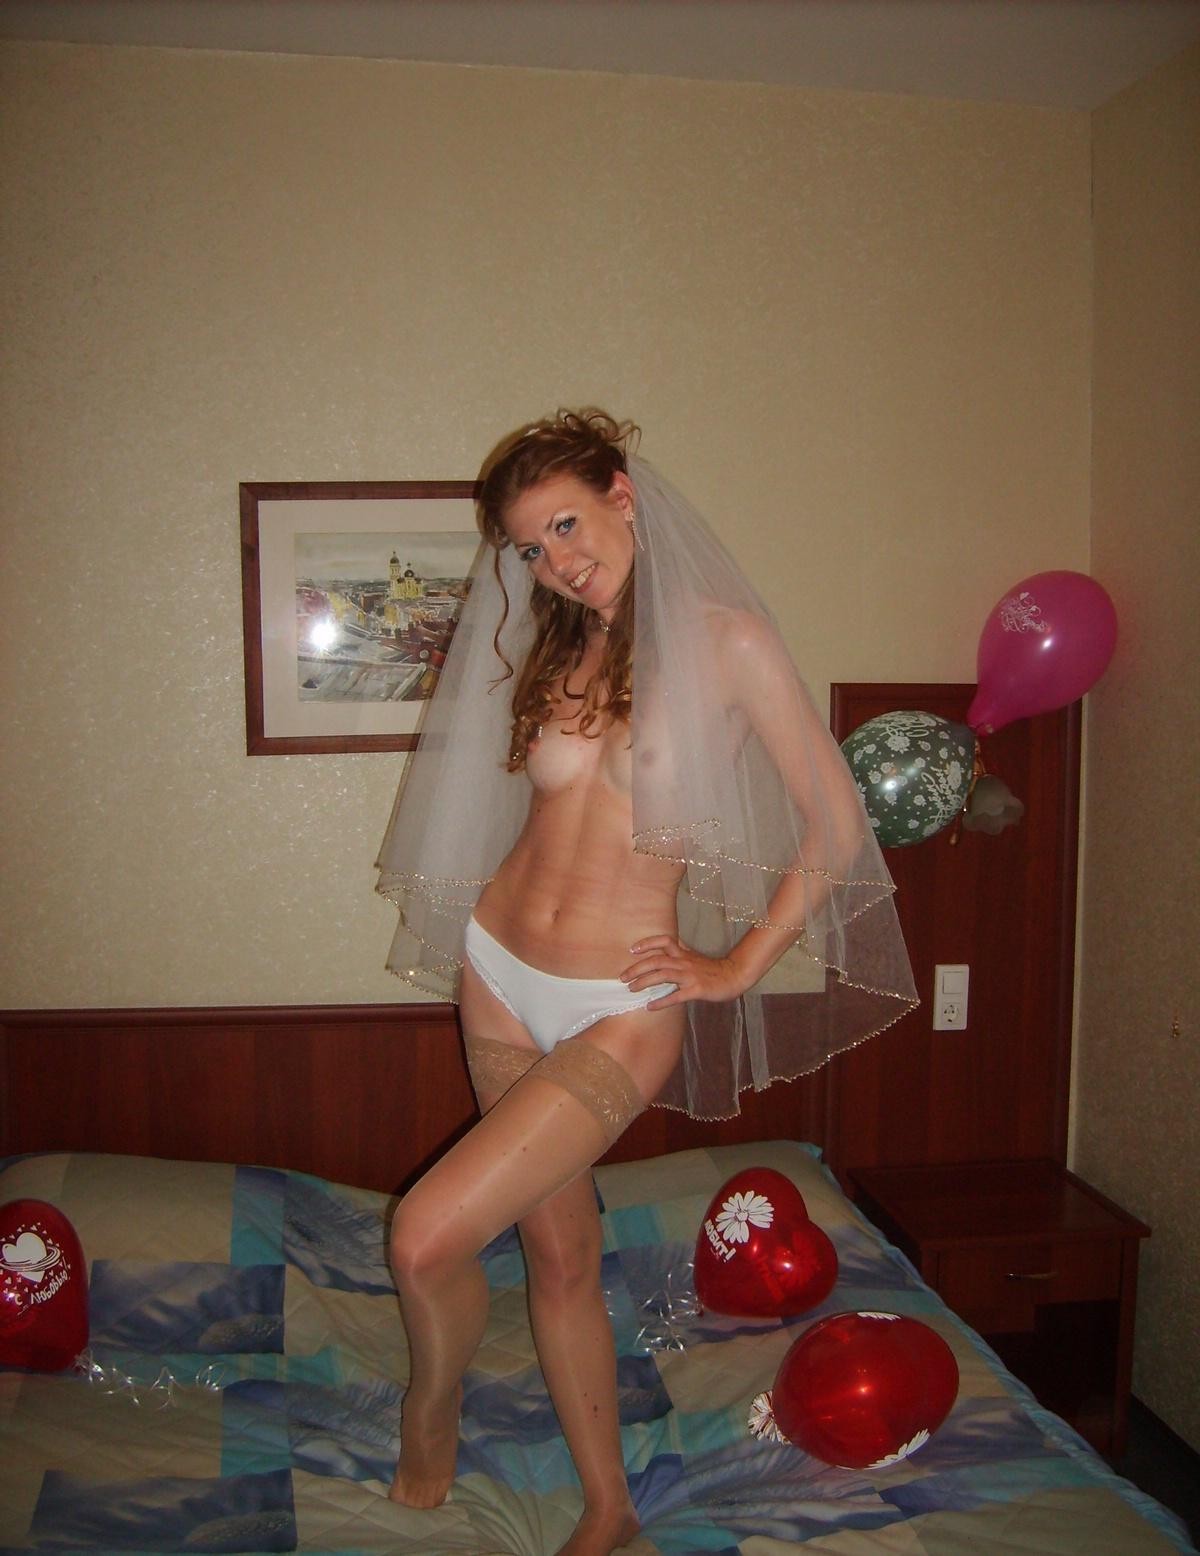 Few unaware upskirts and few different bride photos Archives picture